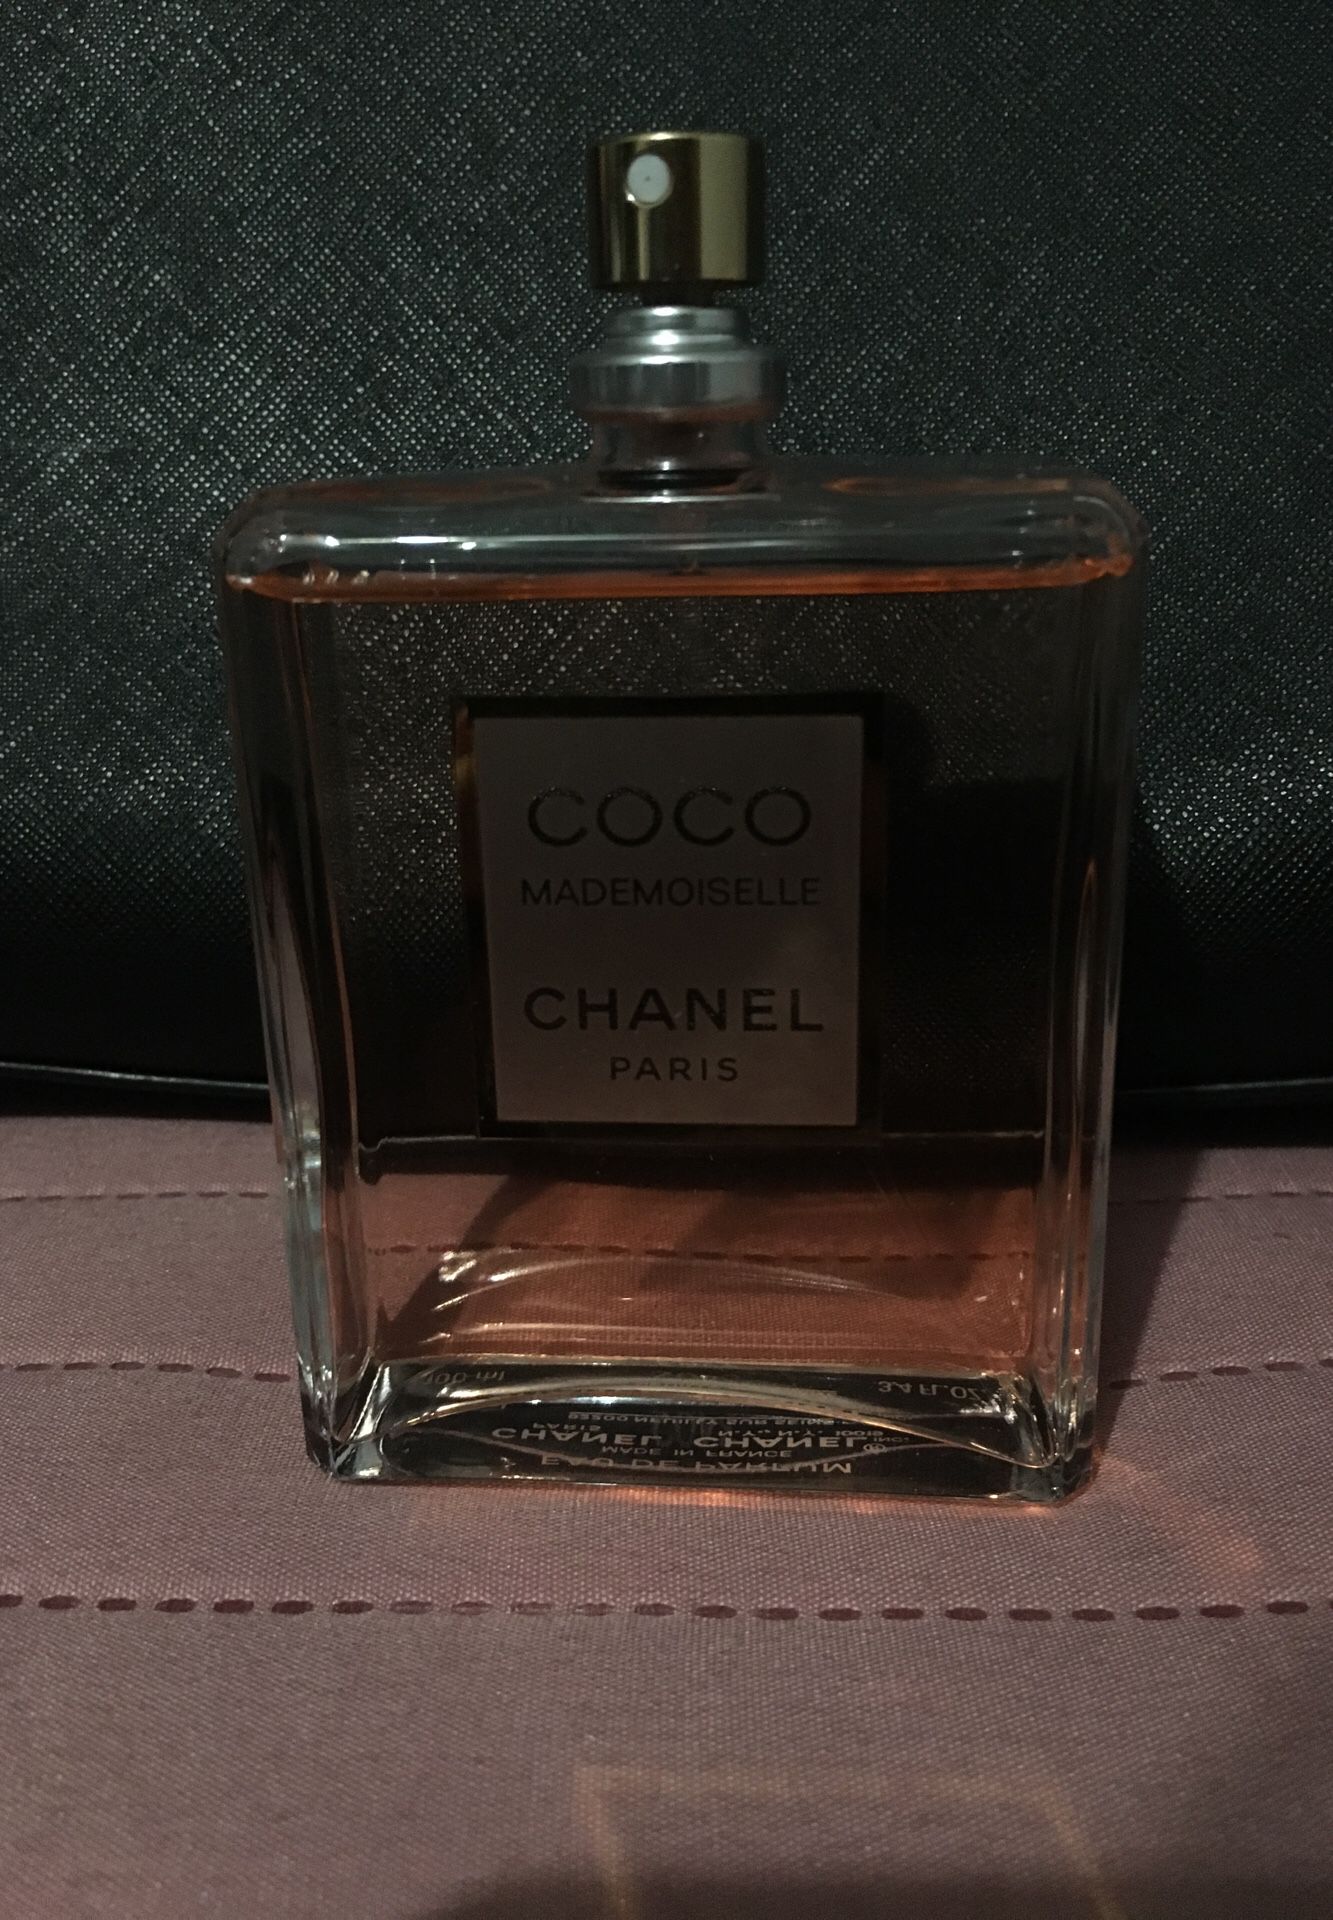 Chanel sample perfume for Sale in Garden Grove, CA - OfferUp